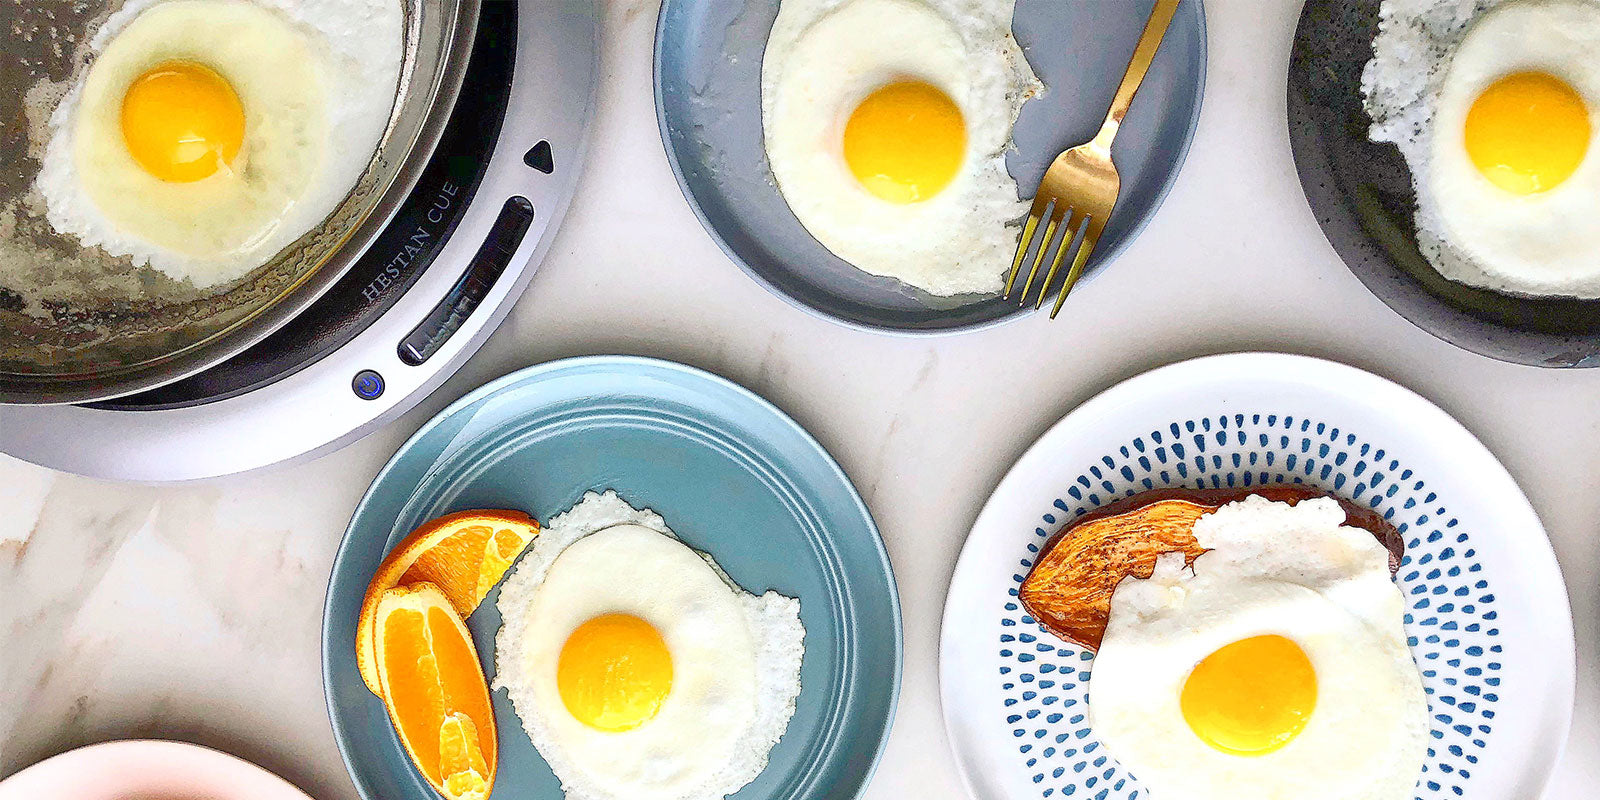 How to Cook Eggs in Stainless Steel Pan - The Easy Way!